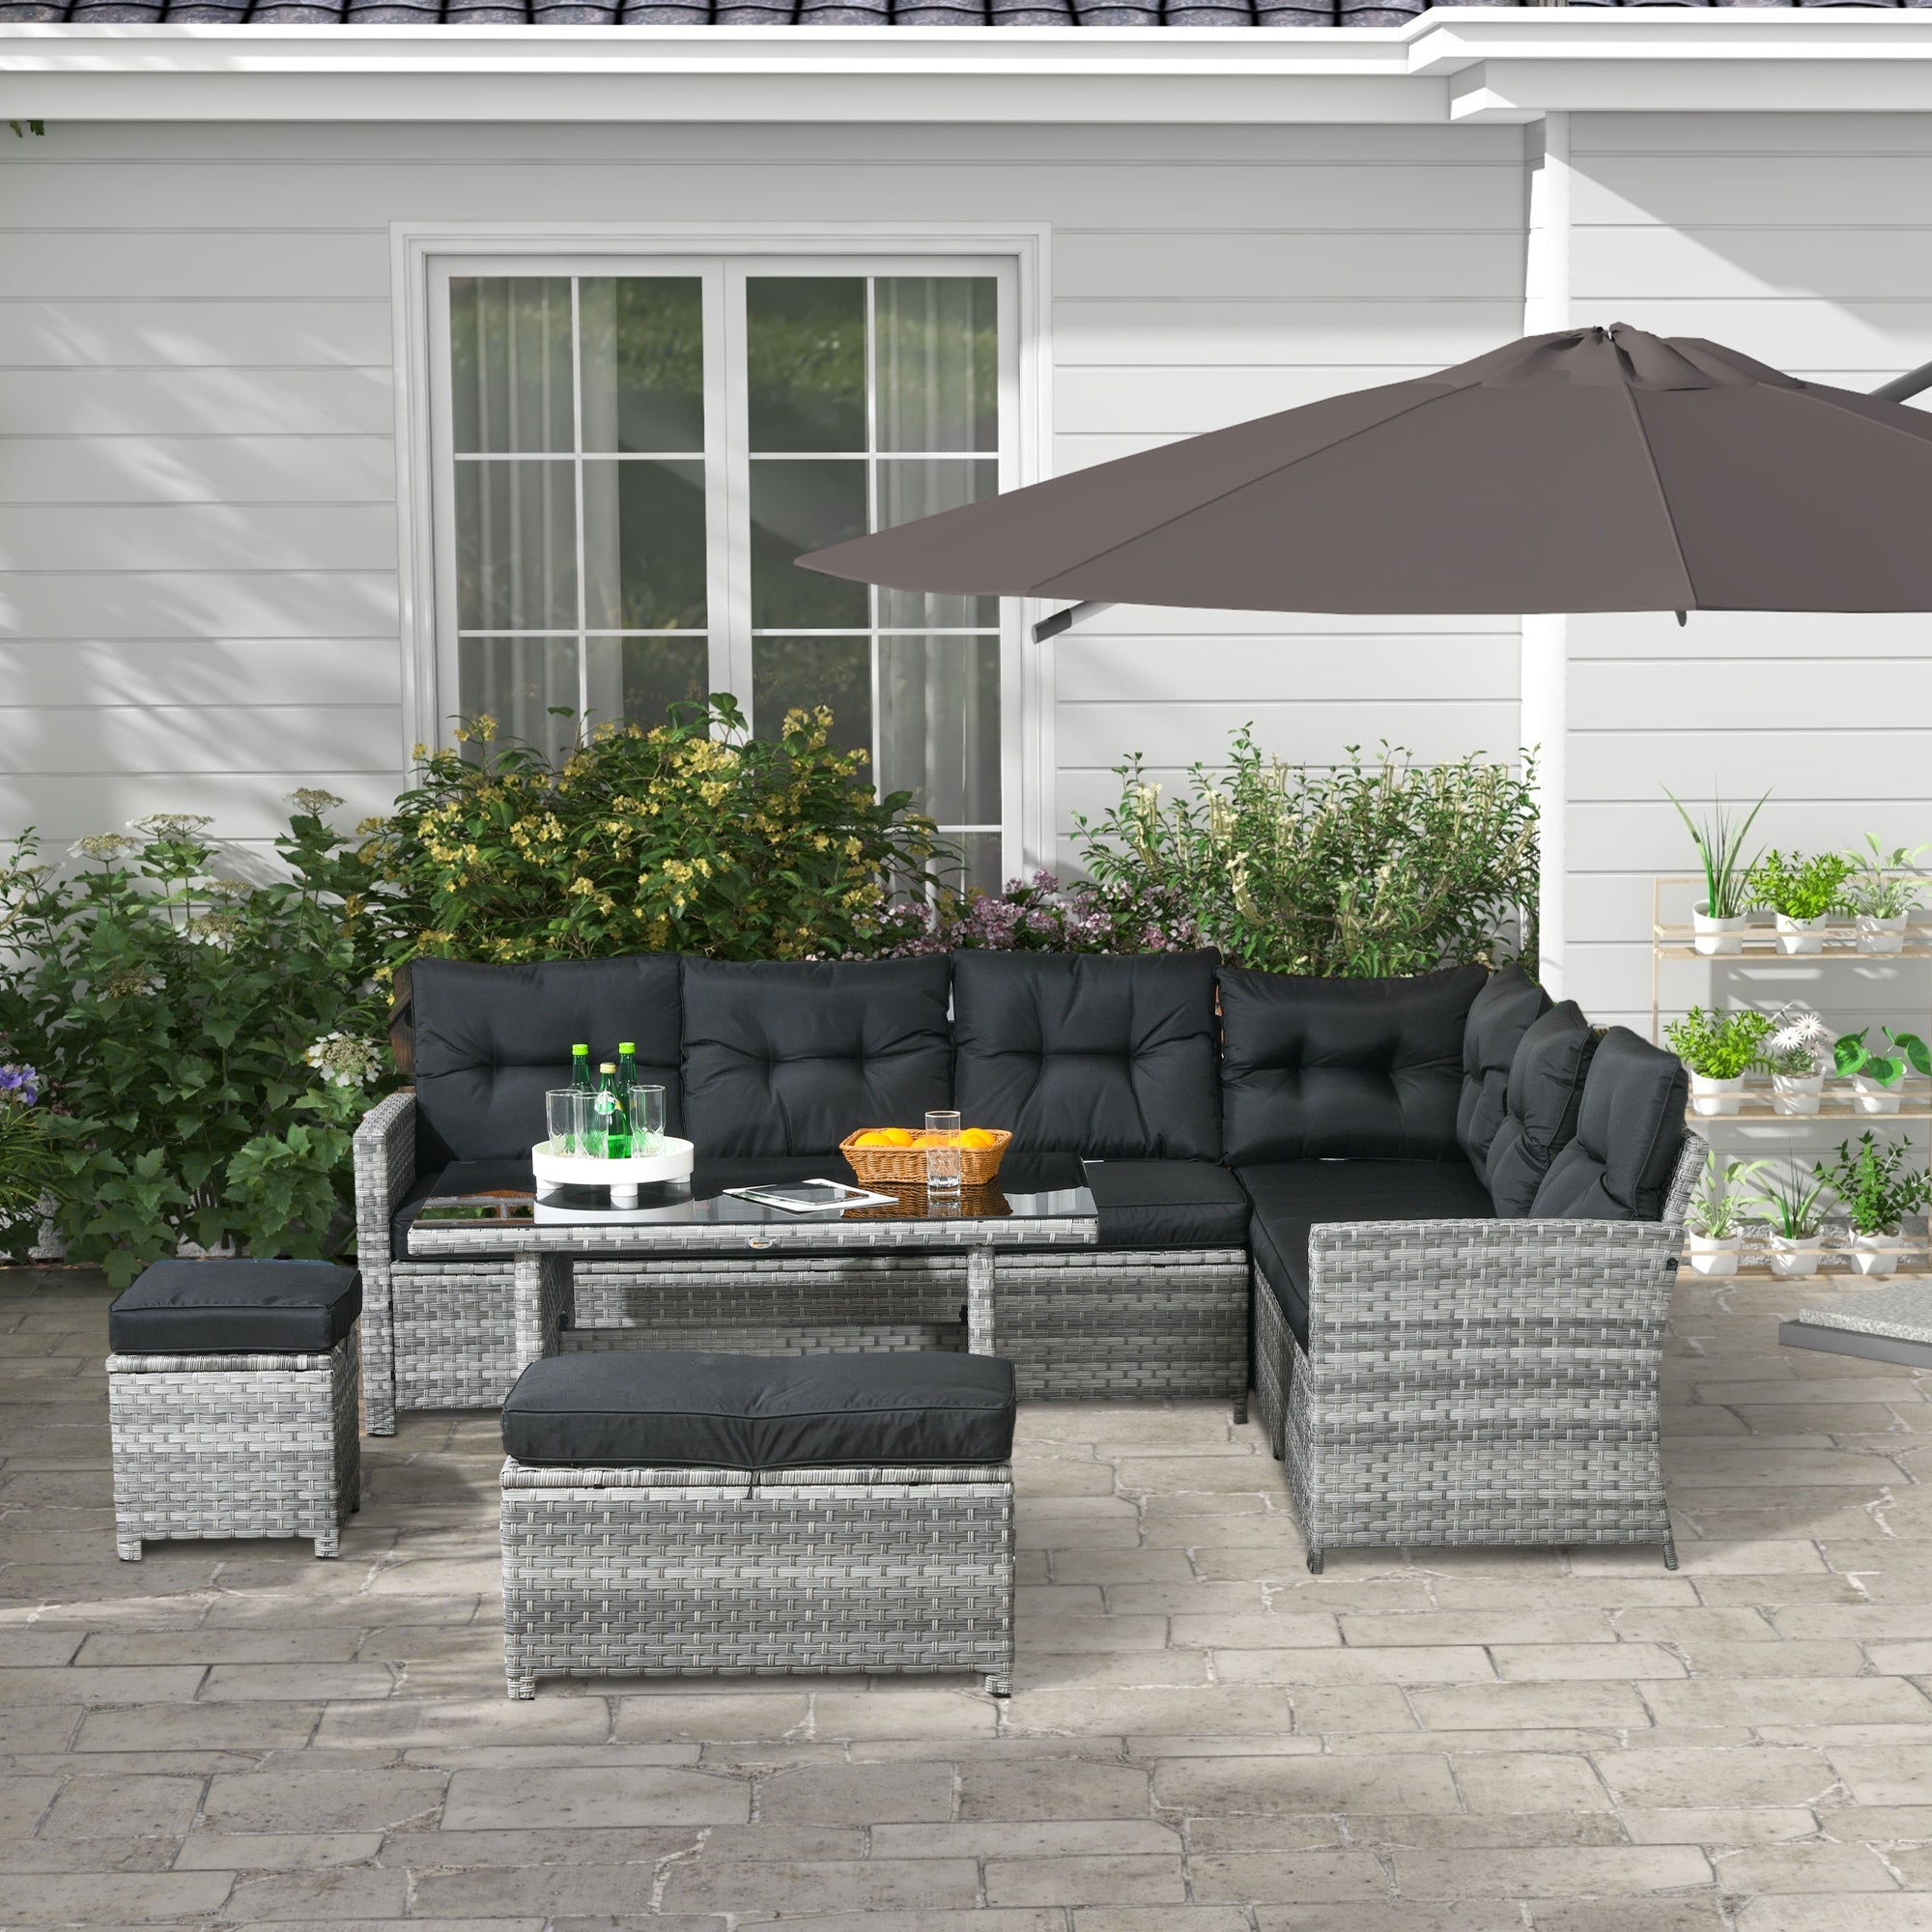 5-Piece Rattan Patio Furniture Set with Corner Sofa, Footstools, Glass Coffee Table, Cushions, Mixed Grey-1